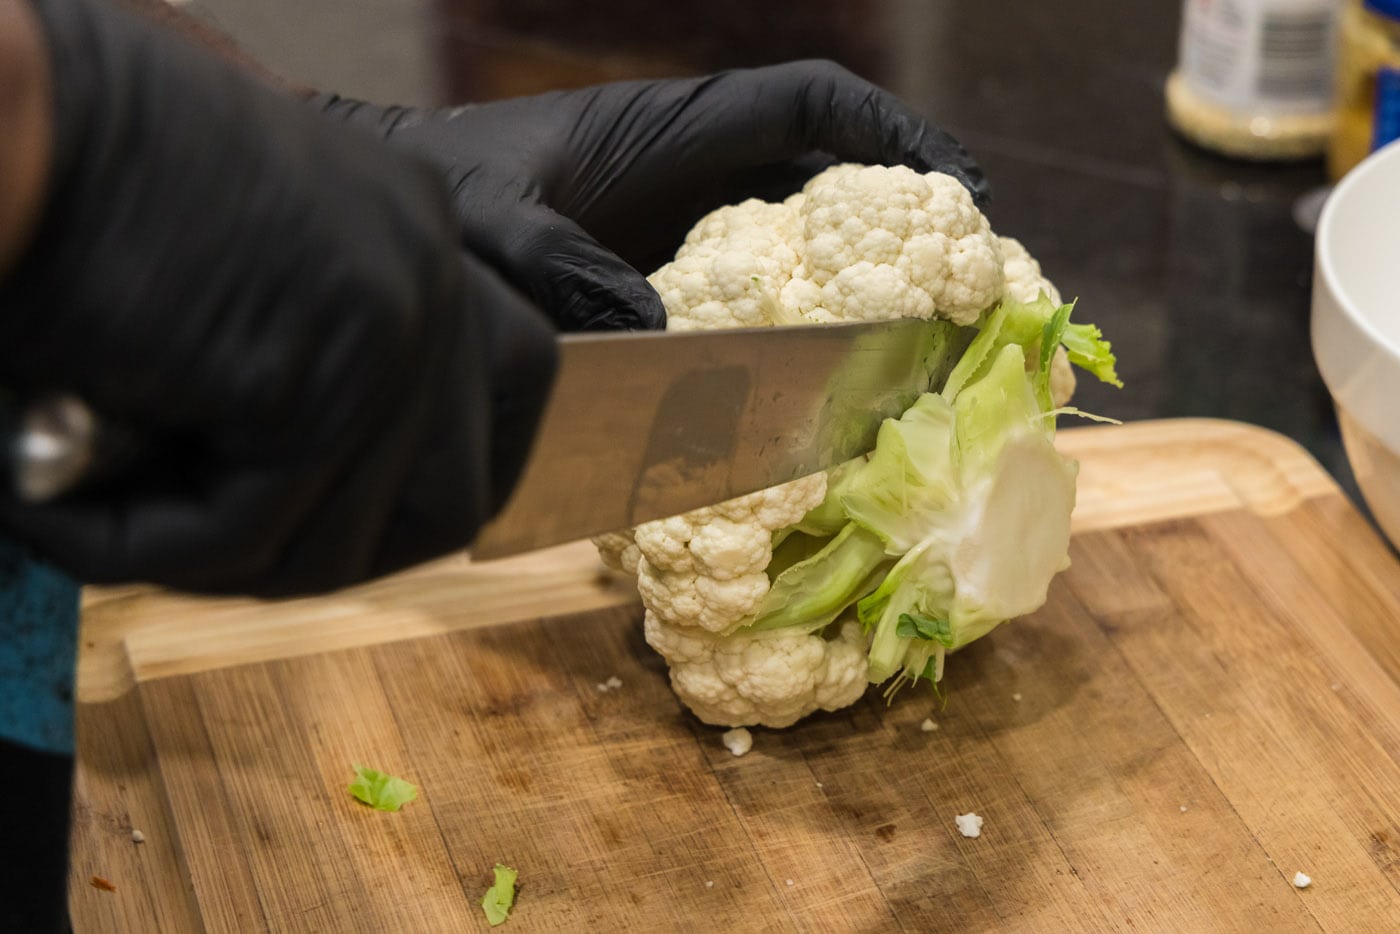 Slicing cauliflower with a chefs knife